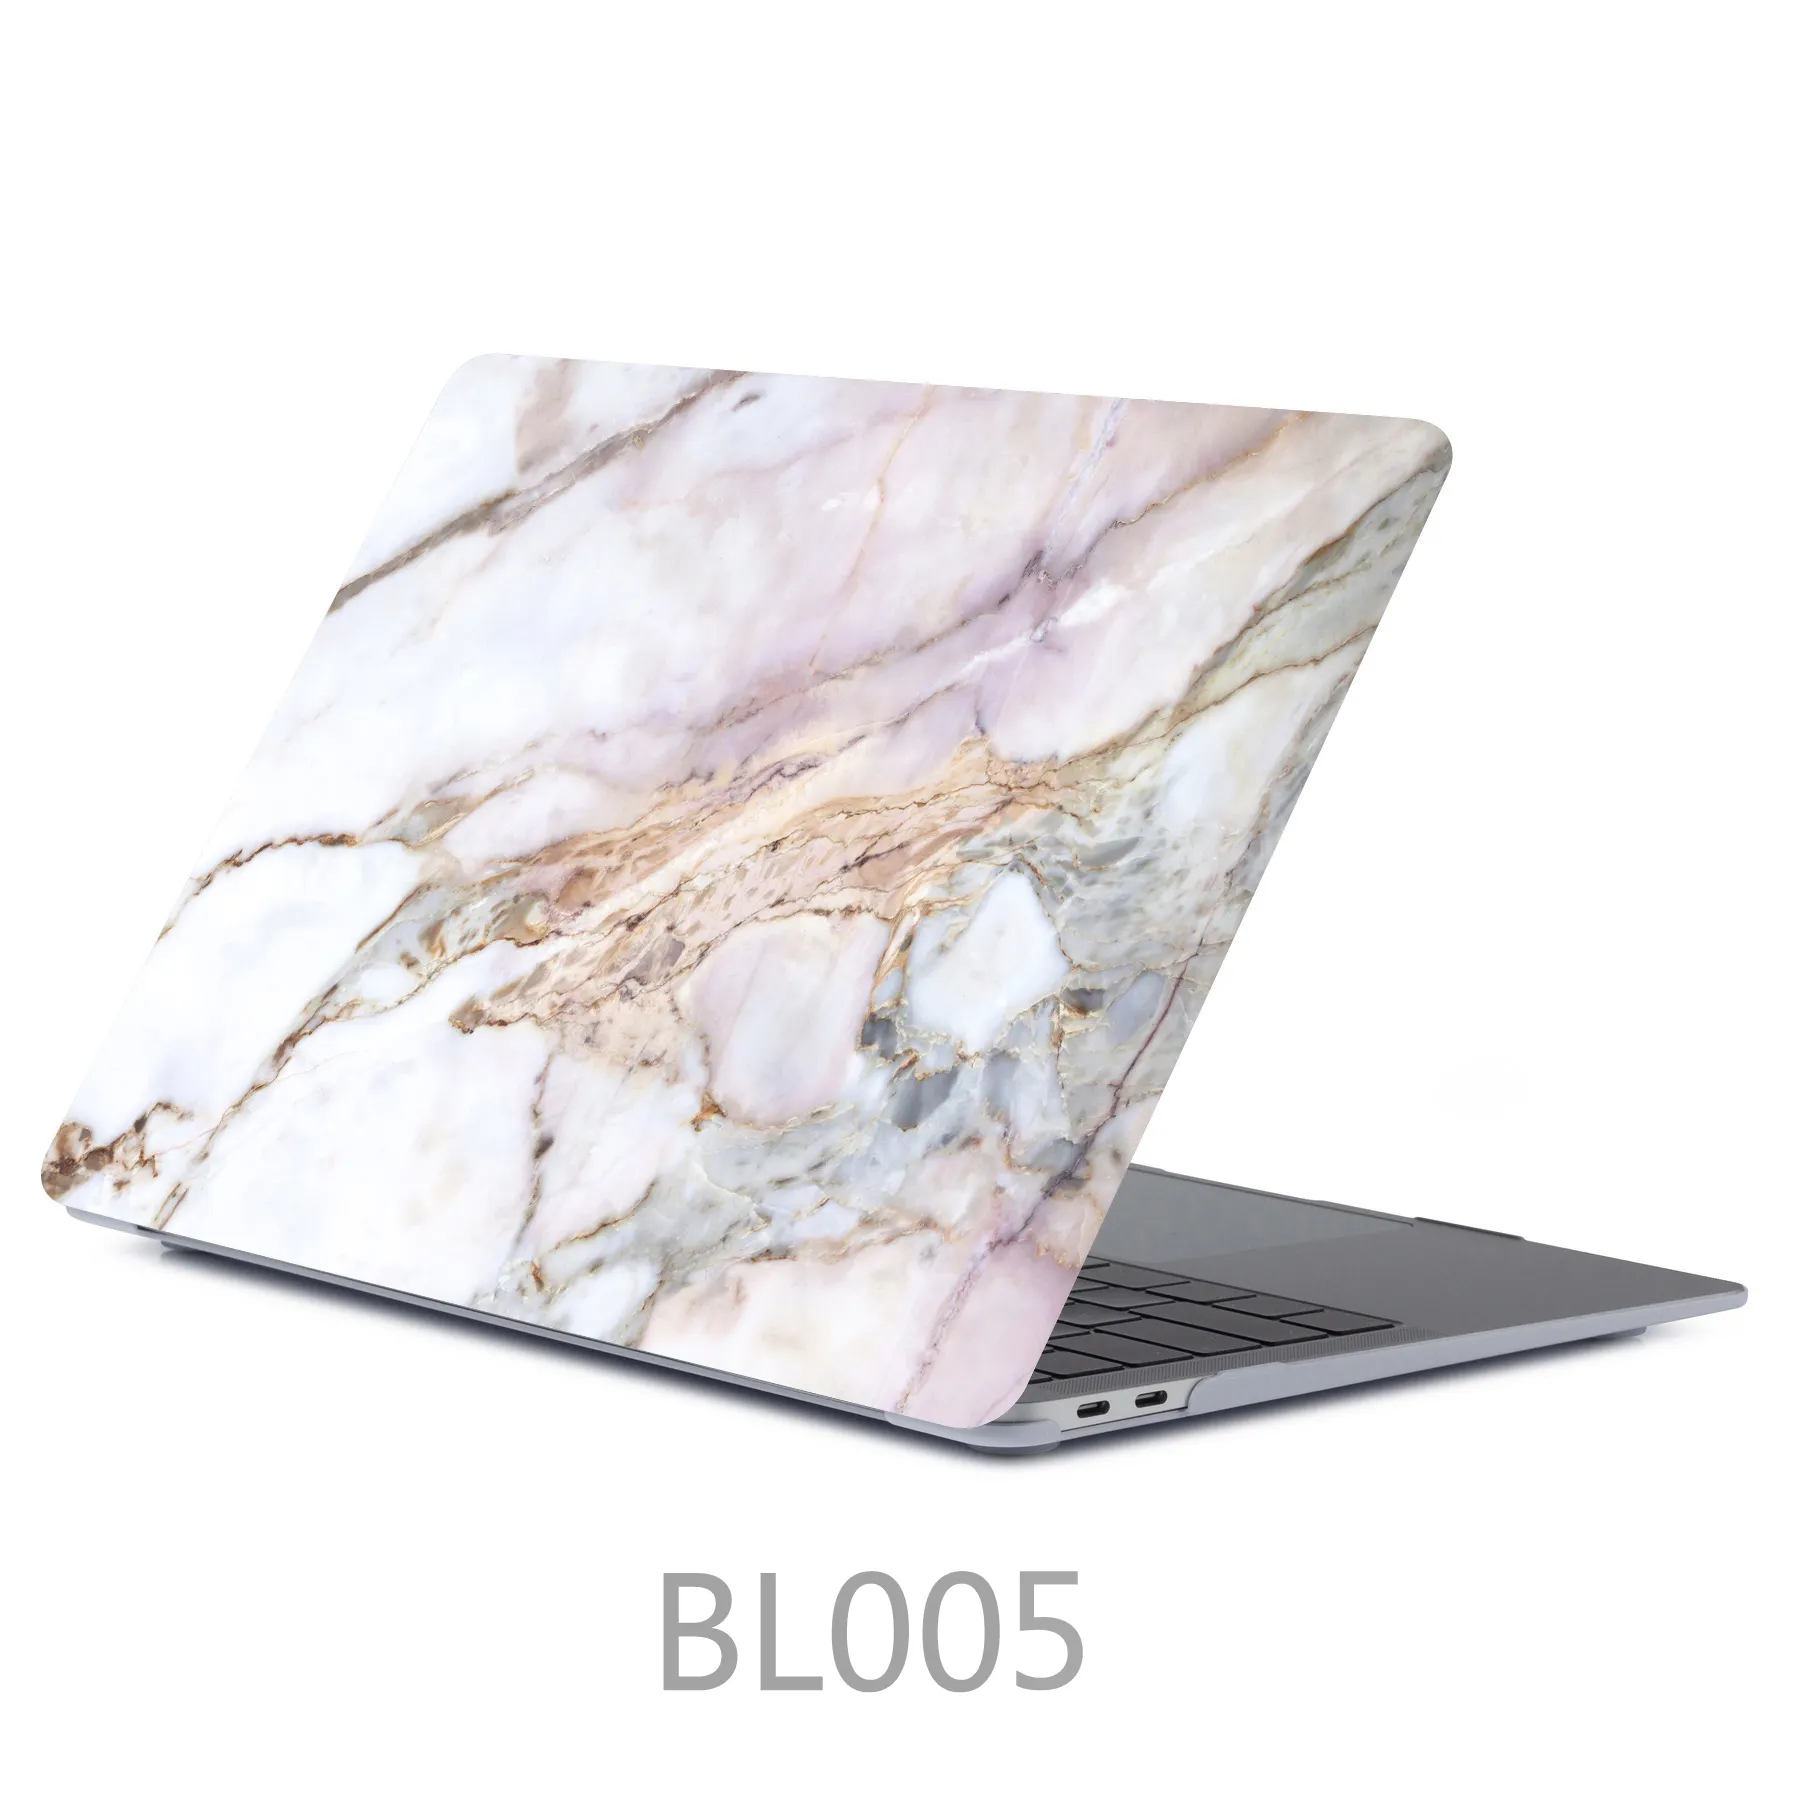 2023 New Customized Print Pattern Crystal hard shell Marble Case Cover For Macbook Air Pro case 11 12 13 15 16 inch full